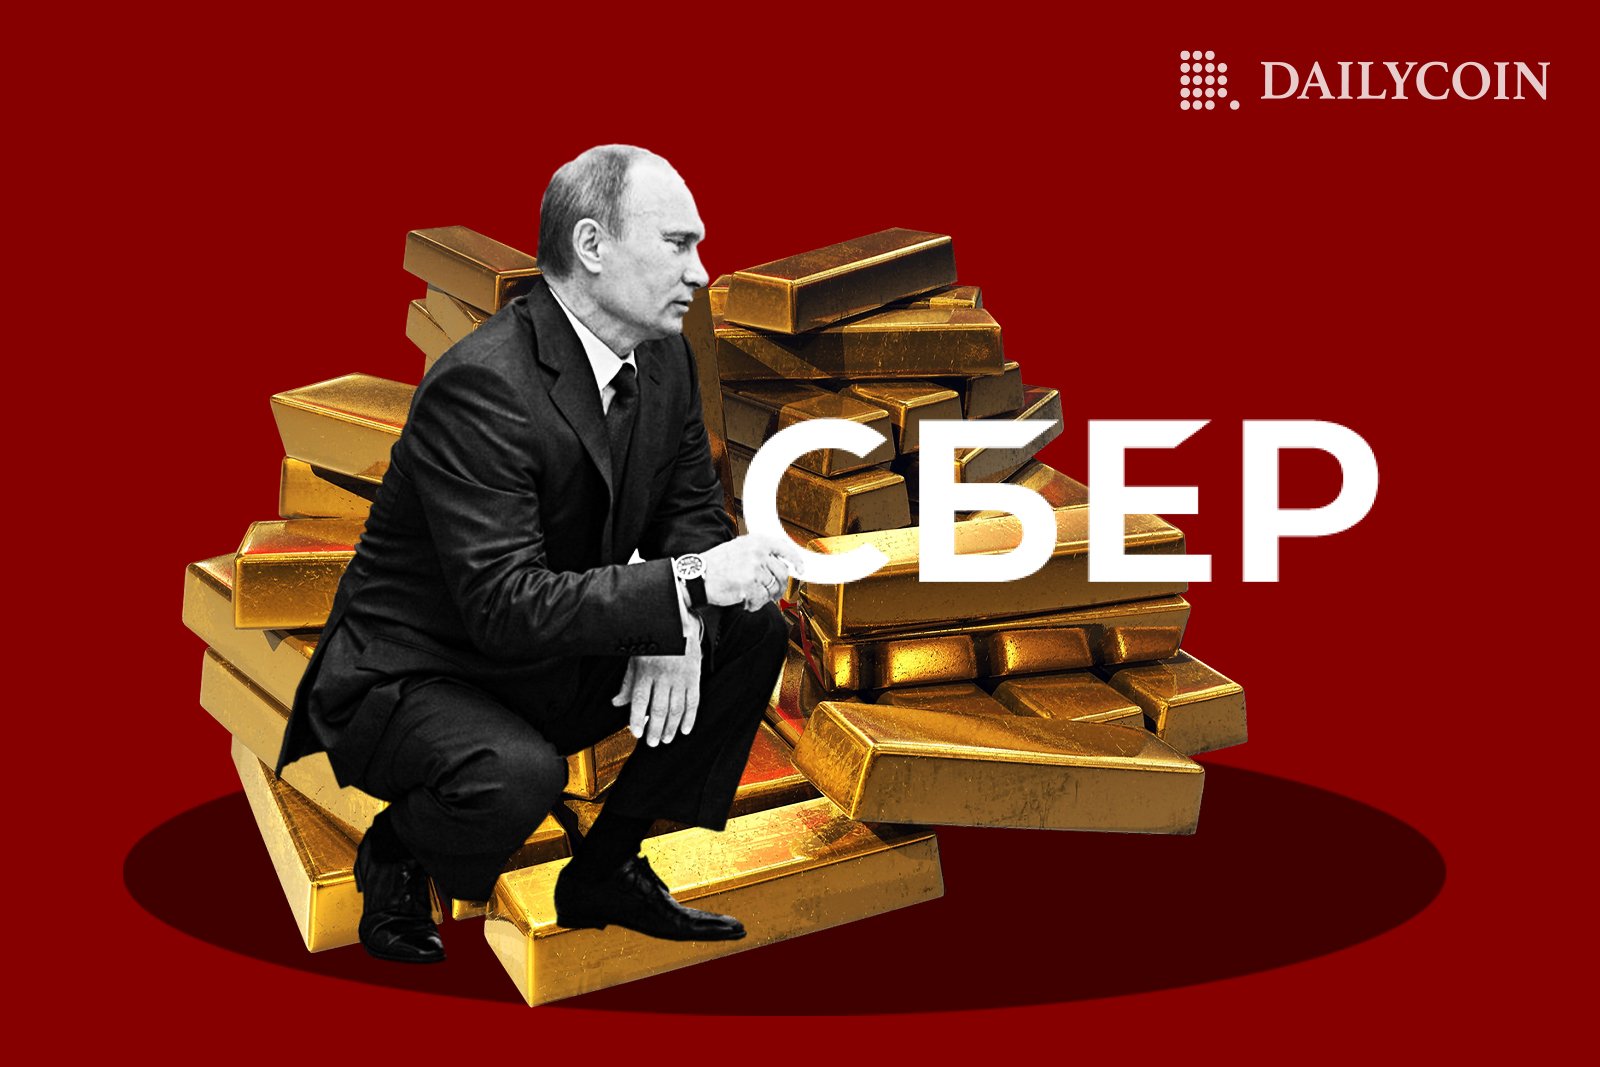 Russian President Vladimir Putin squats next to t pile of gold bars. In cyrillics, text reads "Sber"